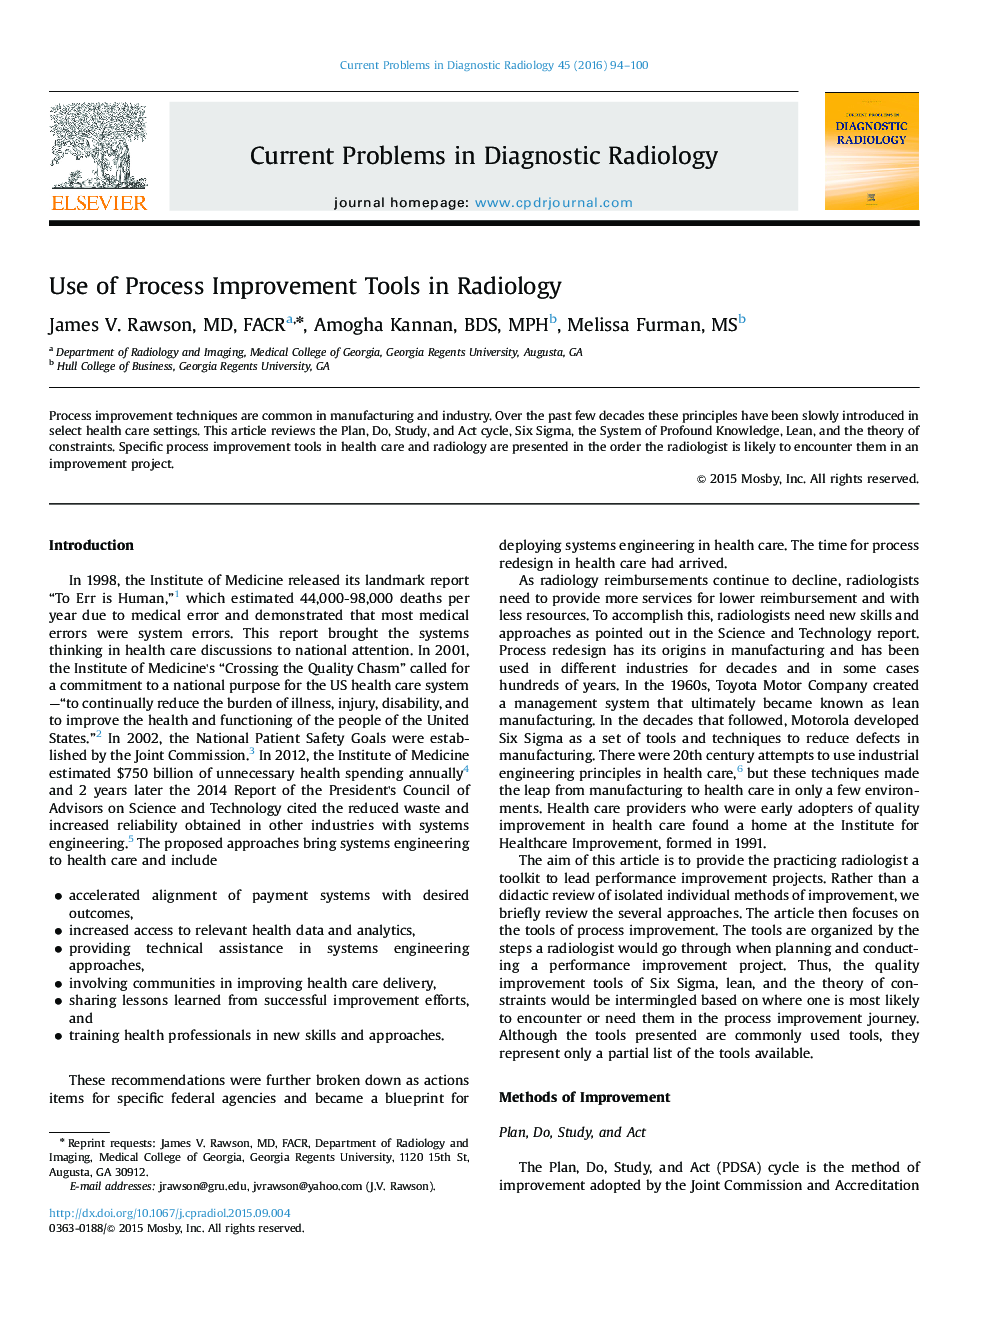 Use of Process Improvement Tools in Radiology